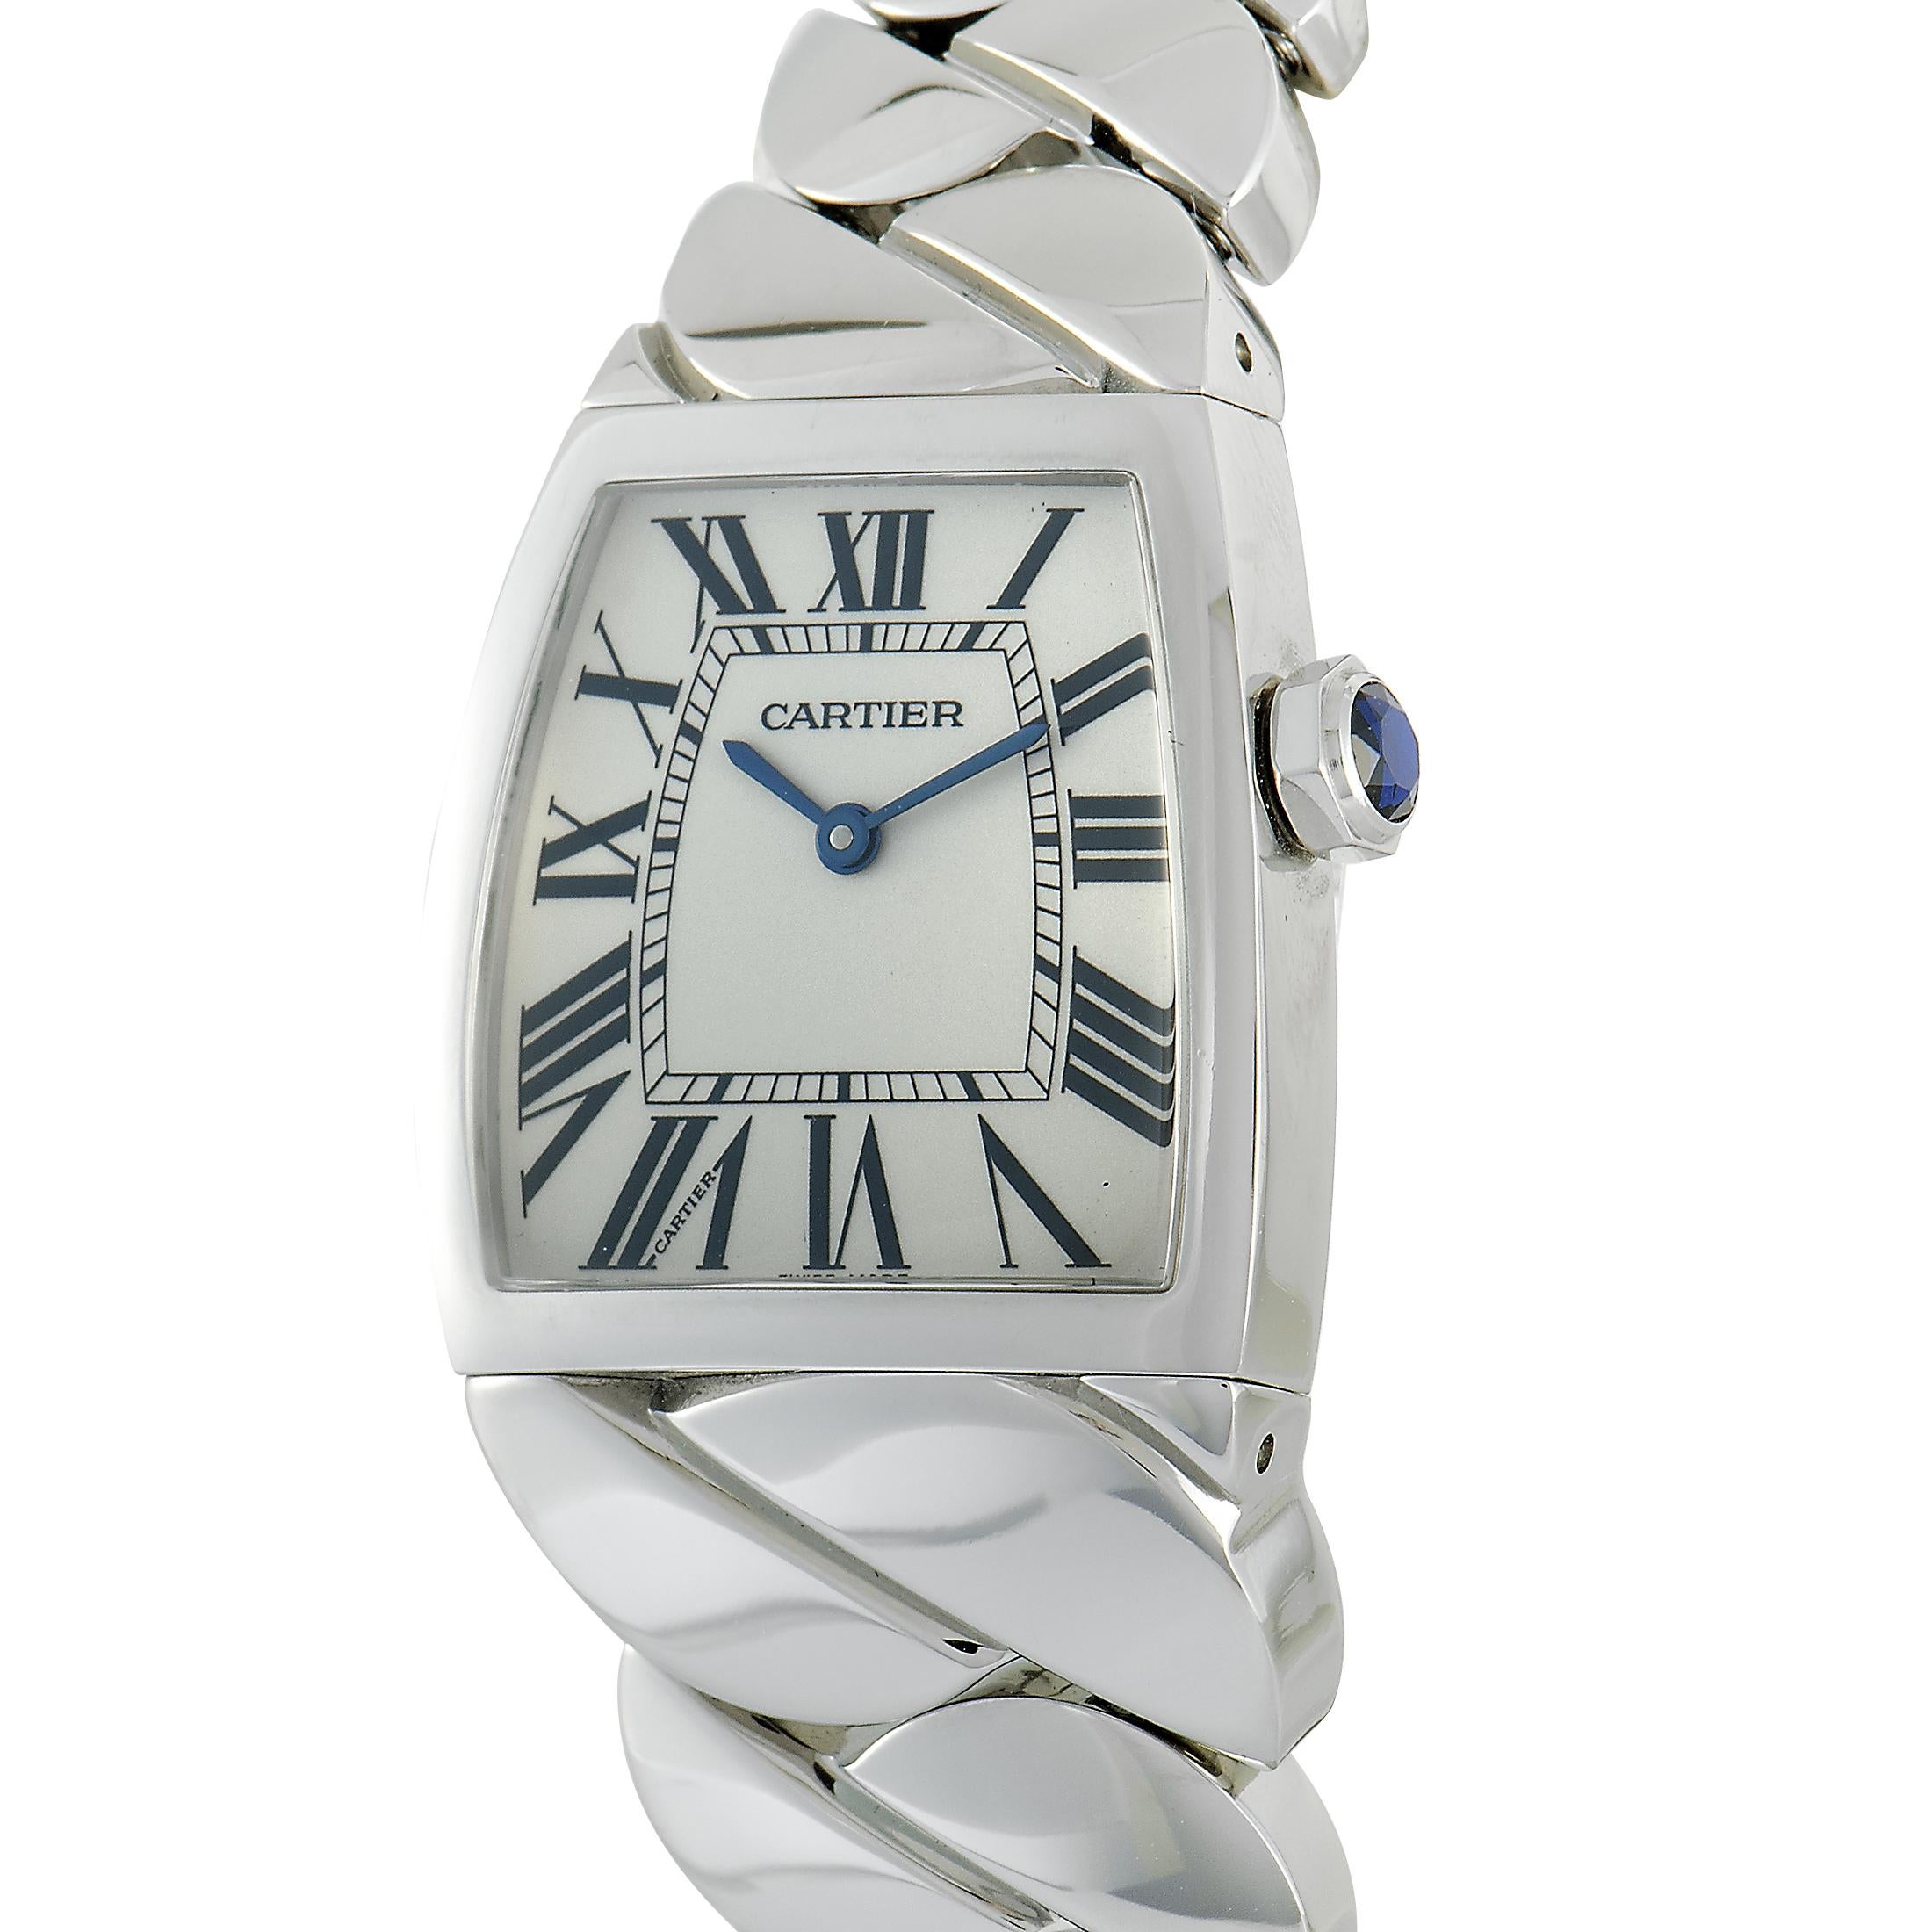 The Cartier La Dona, reference number W660012I, is presented with a water-resistant stainless steel case that is mounted onto a matching stainless steel bracelet. Powered by a quartz movement, the watch indicates hours and minutes upon the dial with